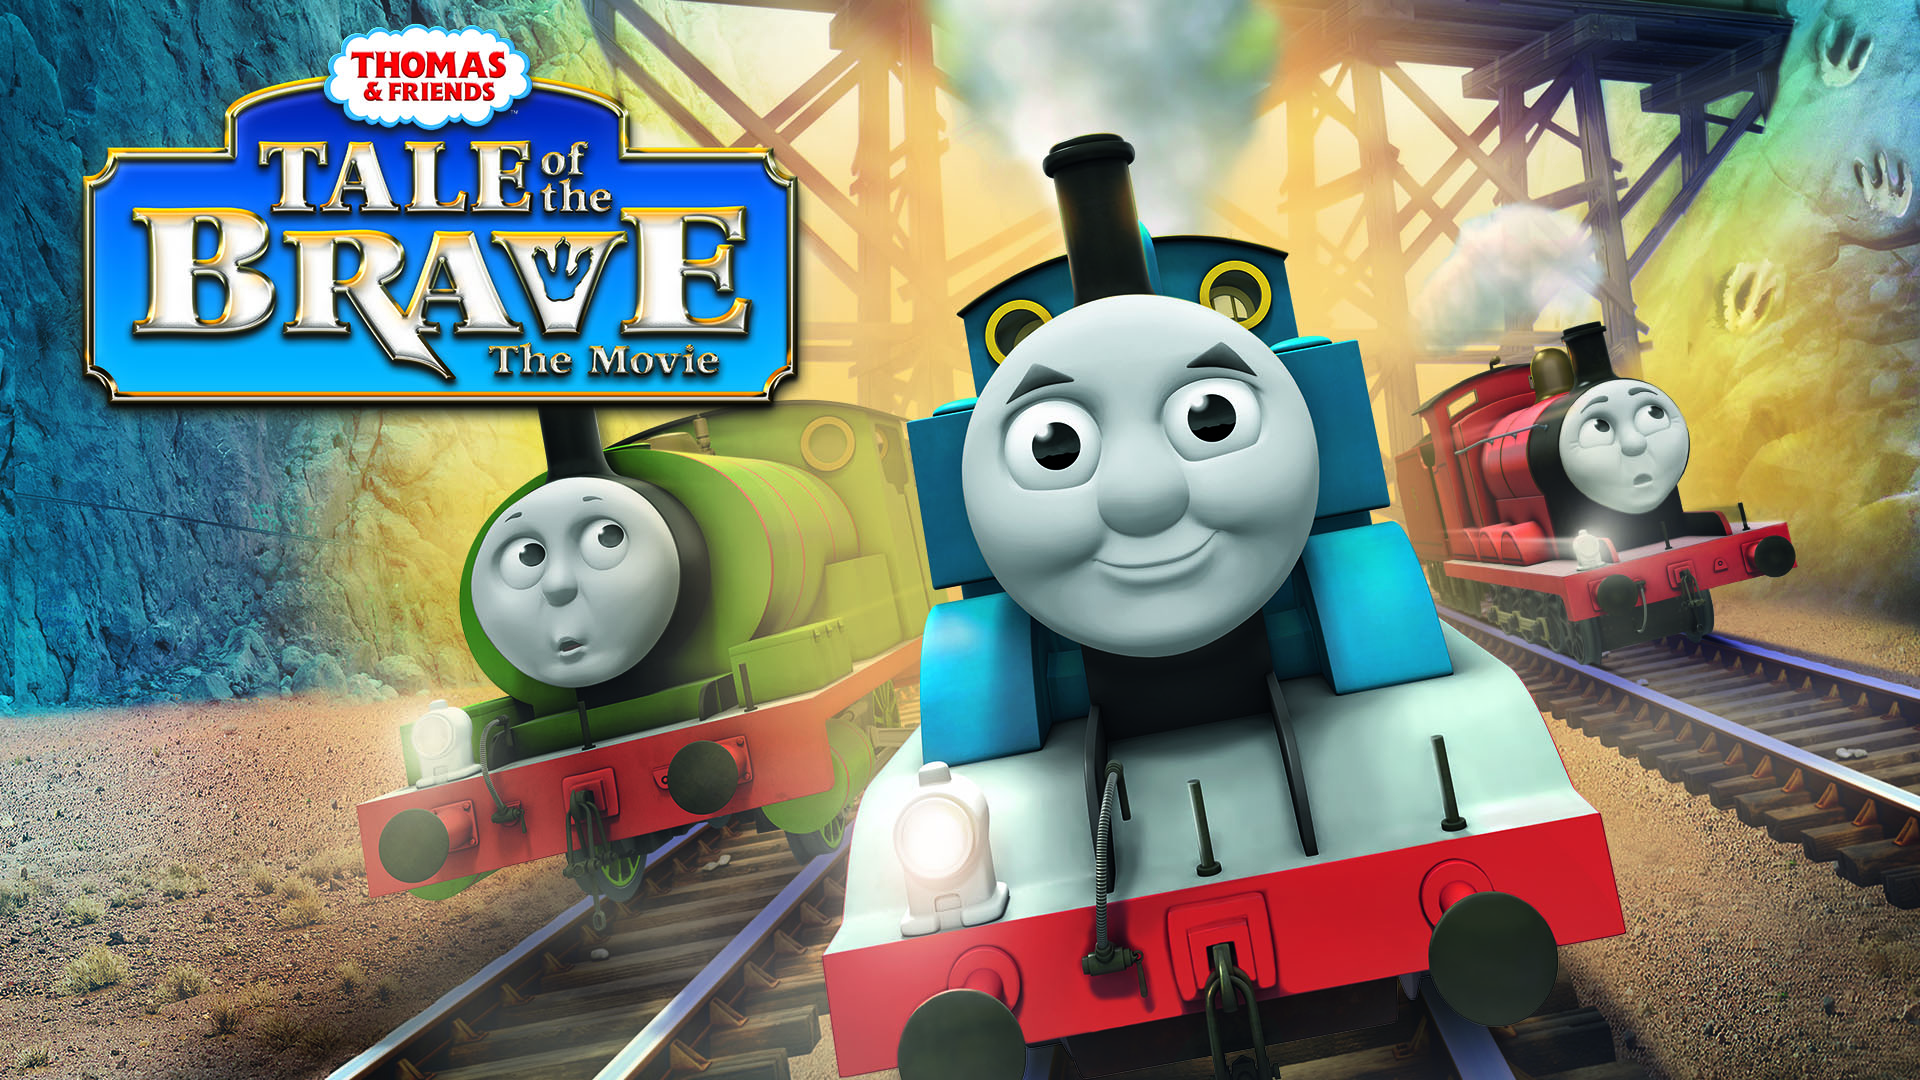 Movie Thomas & Friends: Tale of the Brave HD Wallpaper